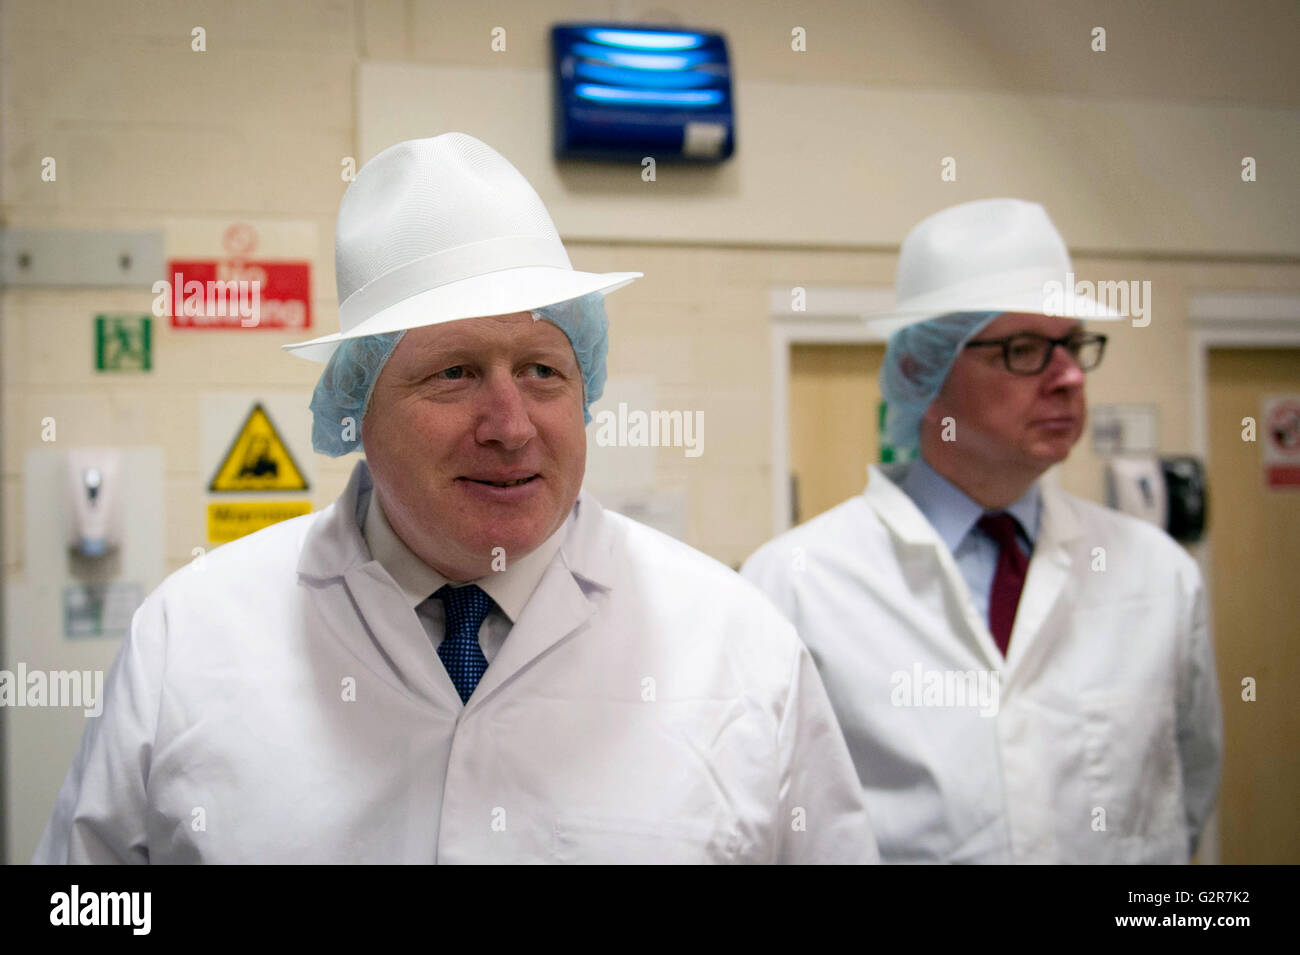 Boris Johnson (left) and Michael Gove during a visit to Farmhouse Biscuits in Nelson, Lancashire, where they were campaigning on behalf of the Vote Leave EU referendum campaign. Stock Photo